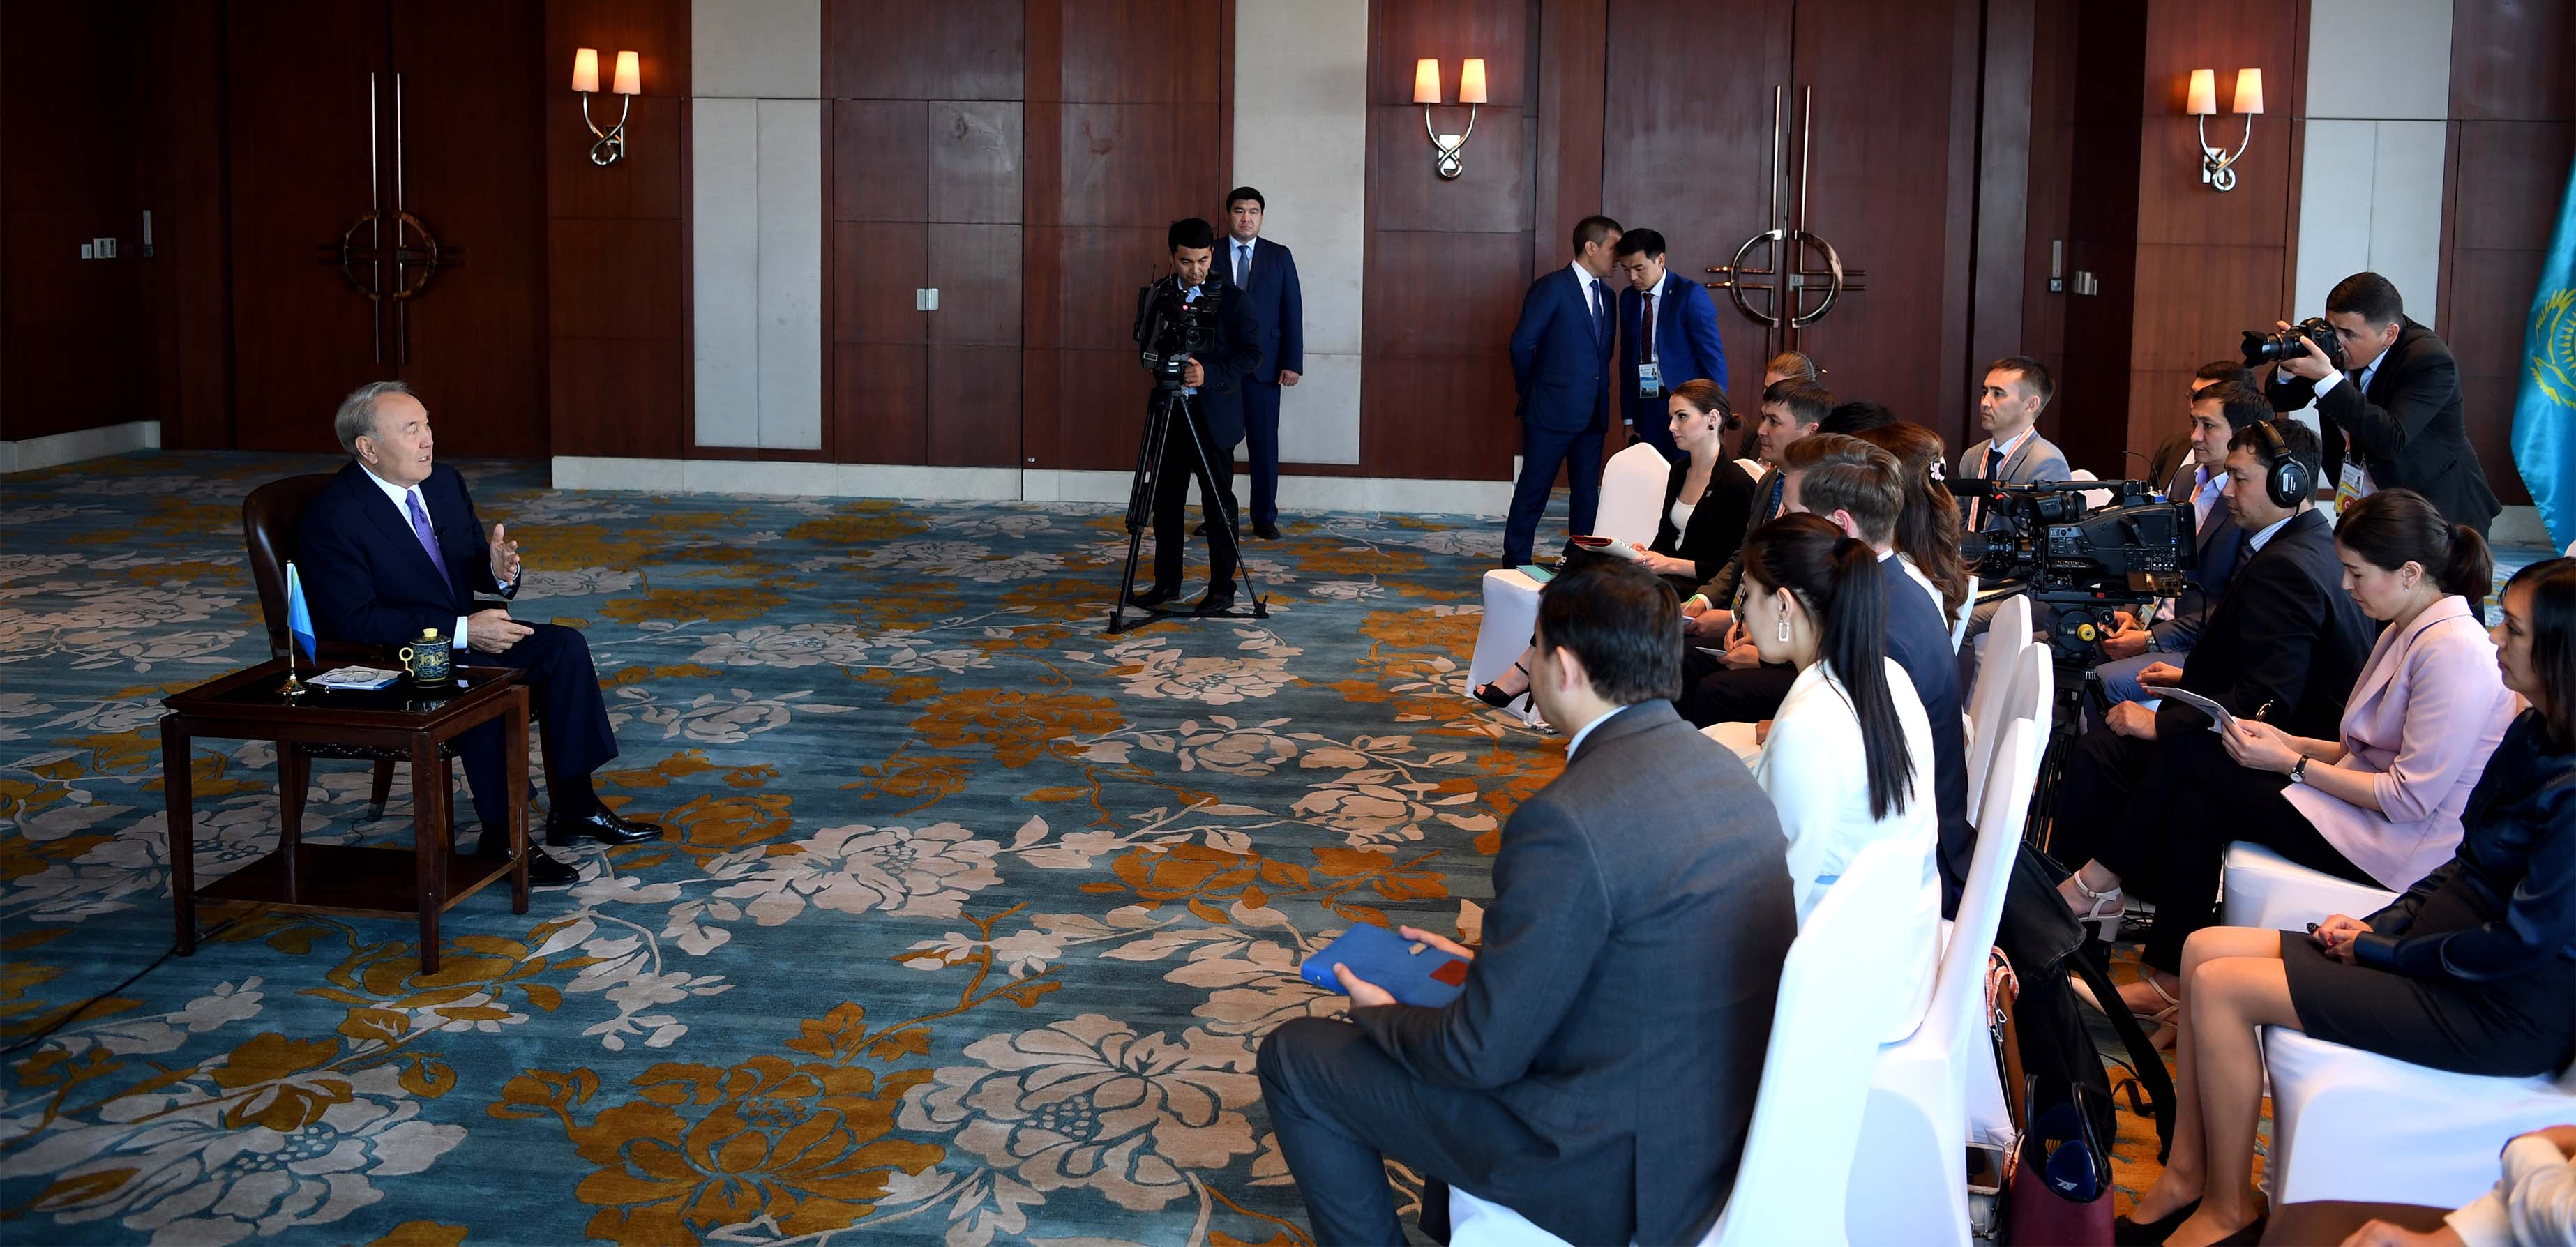 Kazakh President made a briefing for media representatives on results of the visit to the People's Republic of China